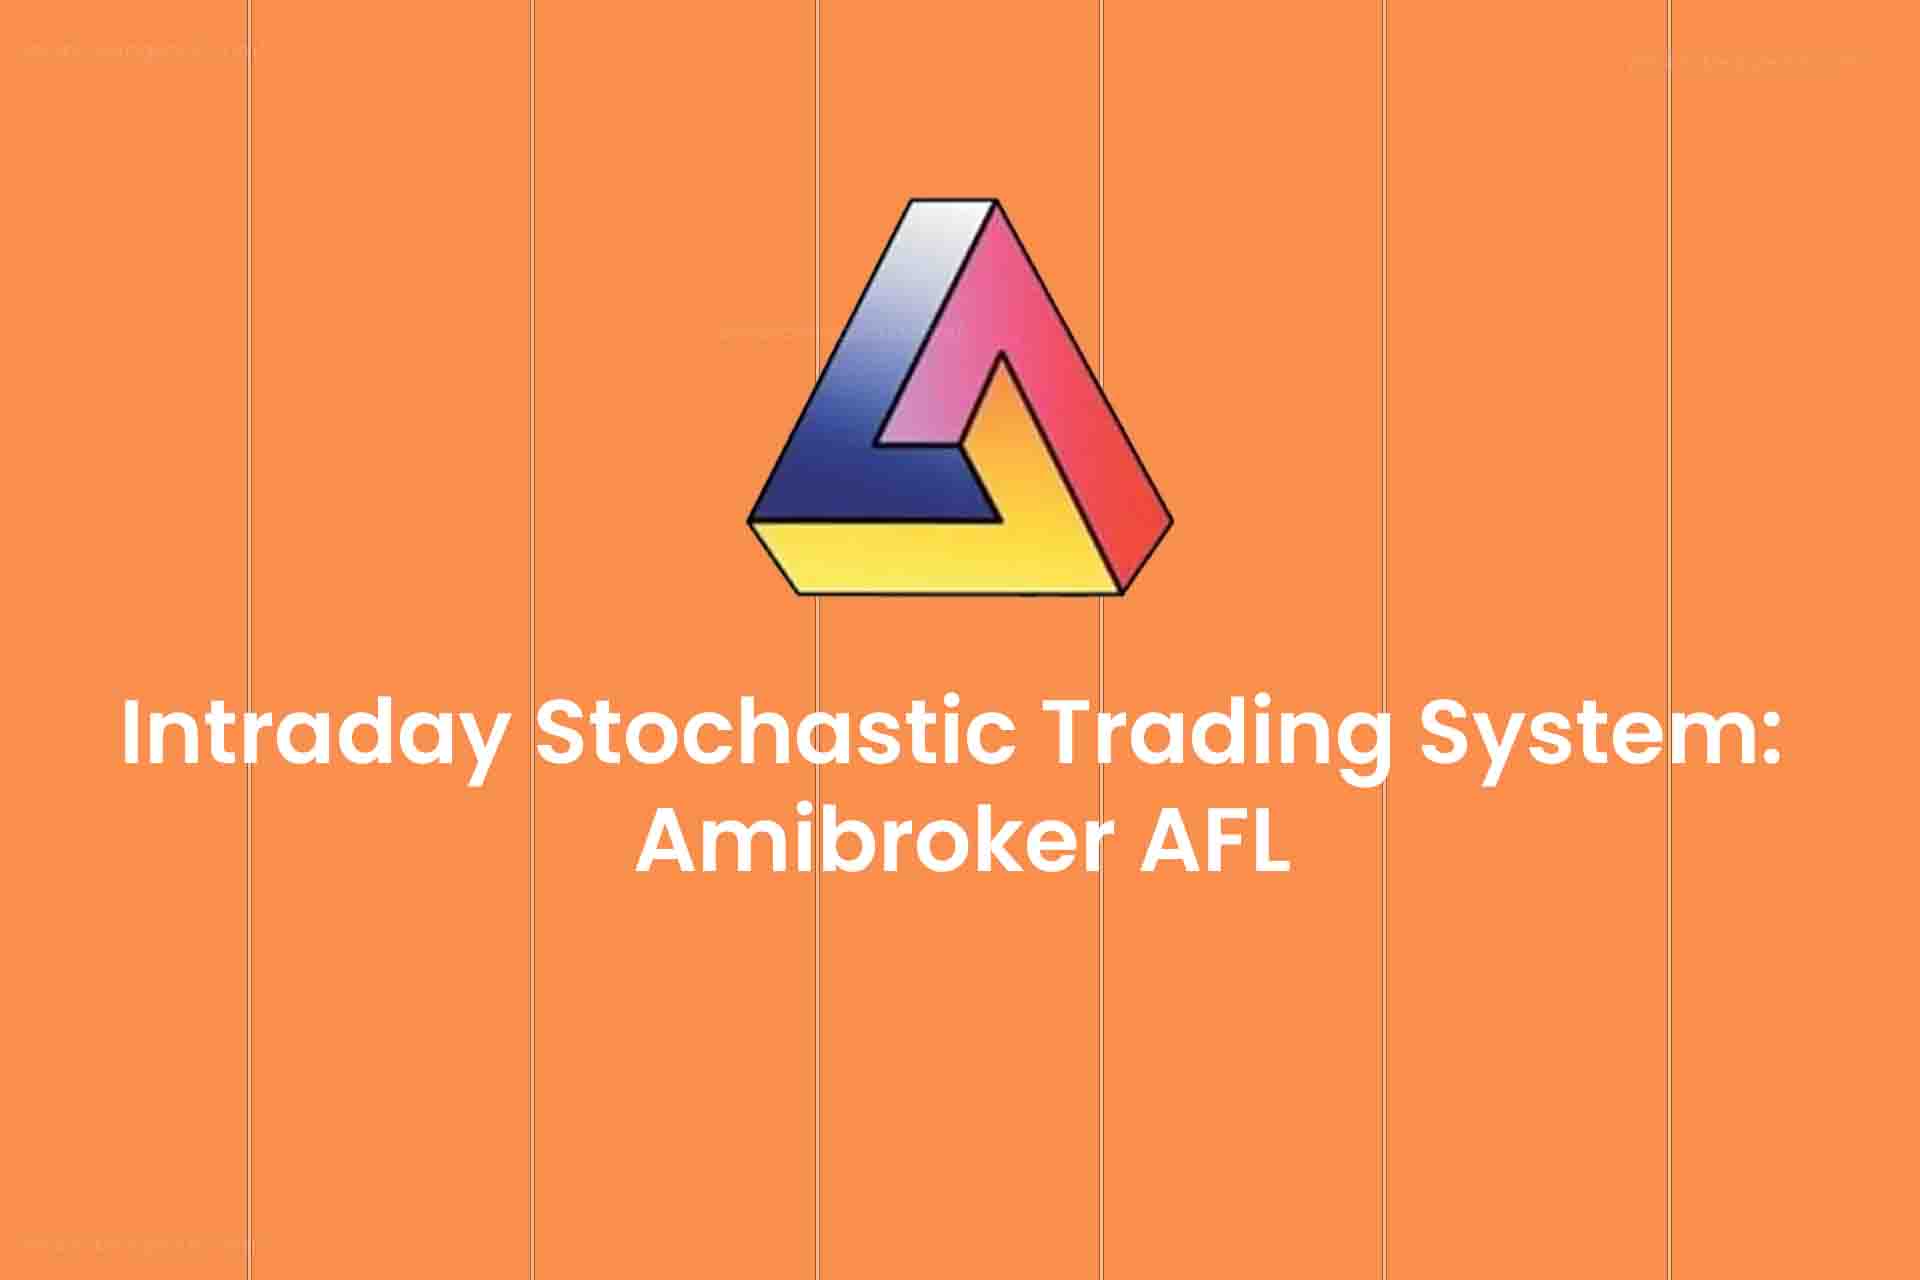 Intraday Stochastic Trading System: Amibroker AFL